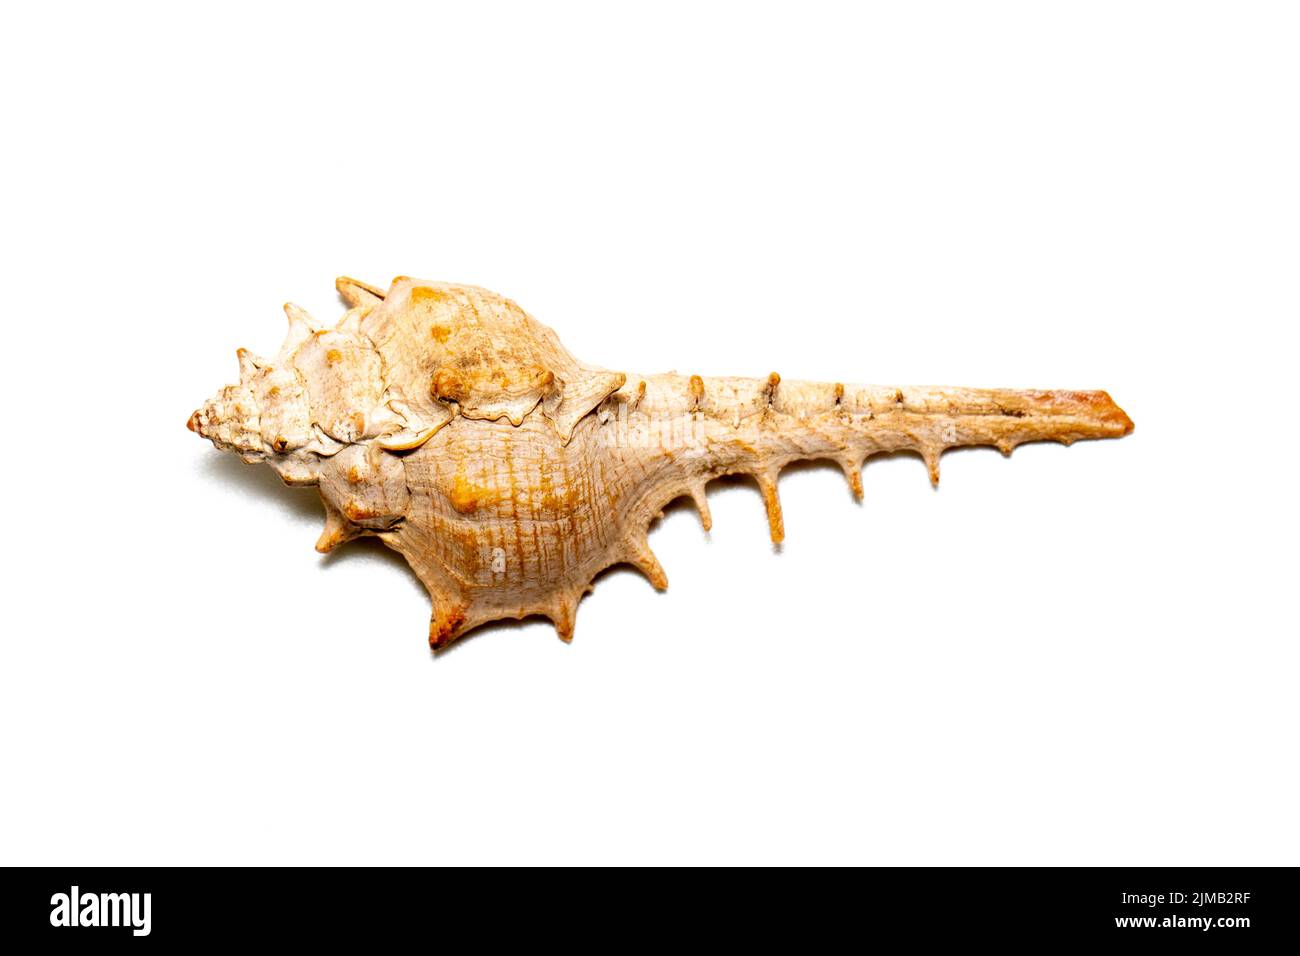 Image of thorn conch shell on a white background. Undersea Animals. Sea shells. Stock Photo